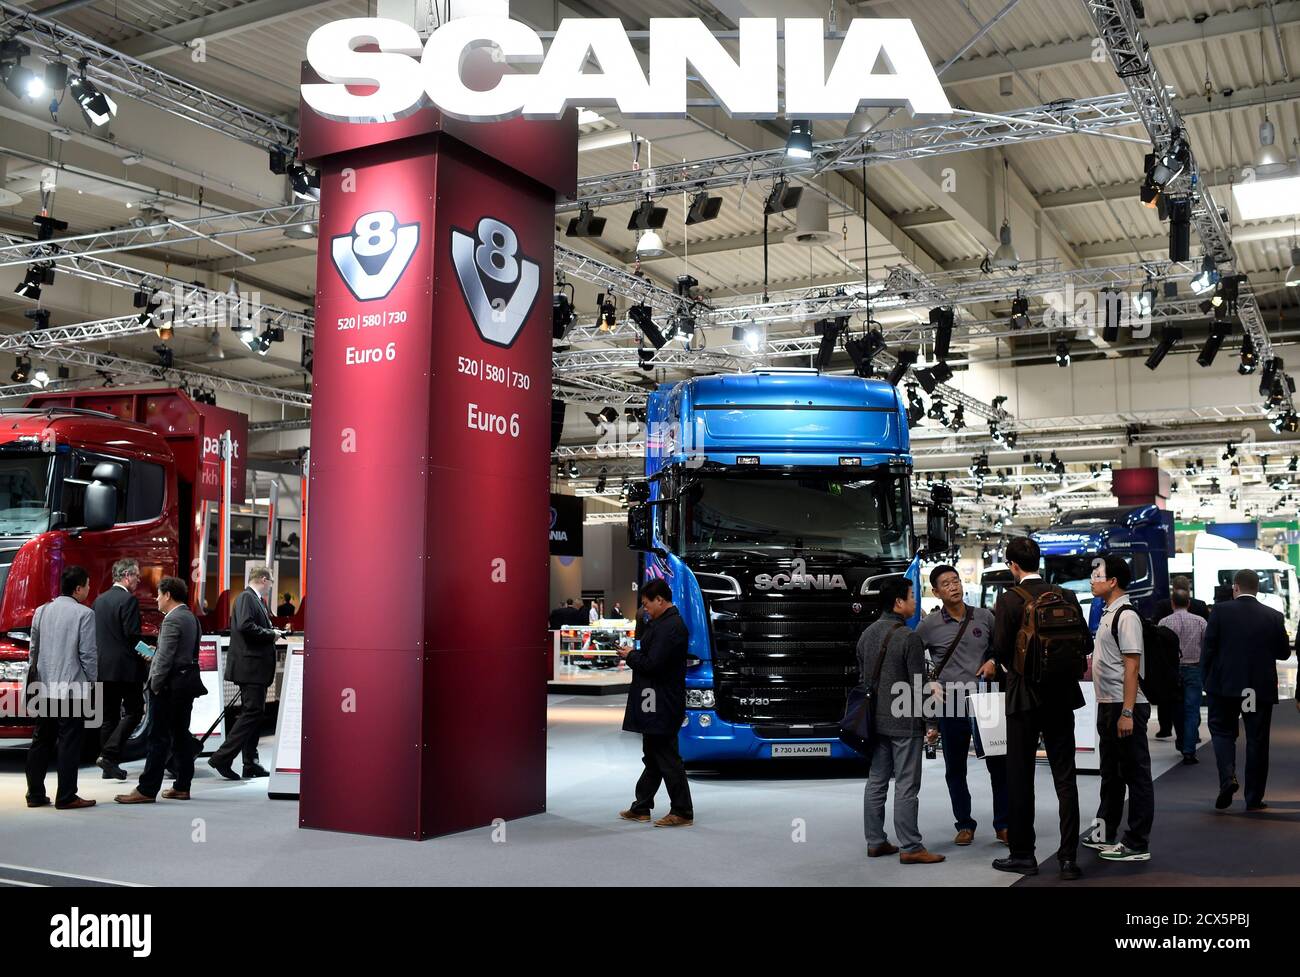 Scania Trucks are pictured  at the booth of Swedish truck maker Scania at the IAA truck show in Hanover, September 23,  2014. The IAA 2014 will open its doors for the public on September 25. REUTERS/Fabian Bimmer (GERMANY - Tags: BUSINESS TRANSPORT) Stock Photo